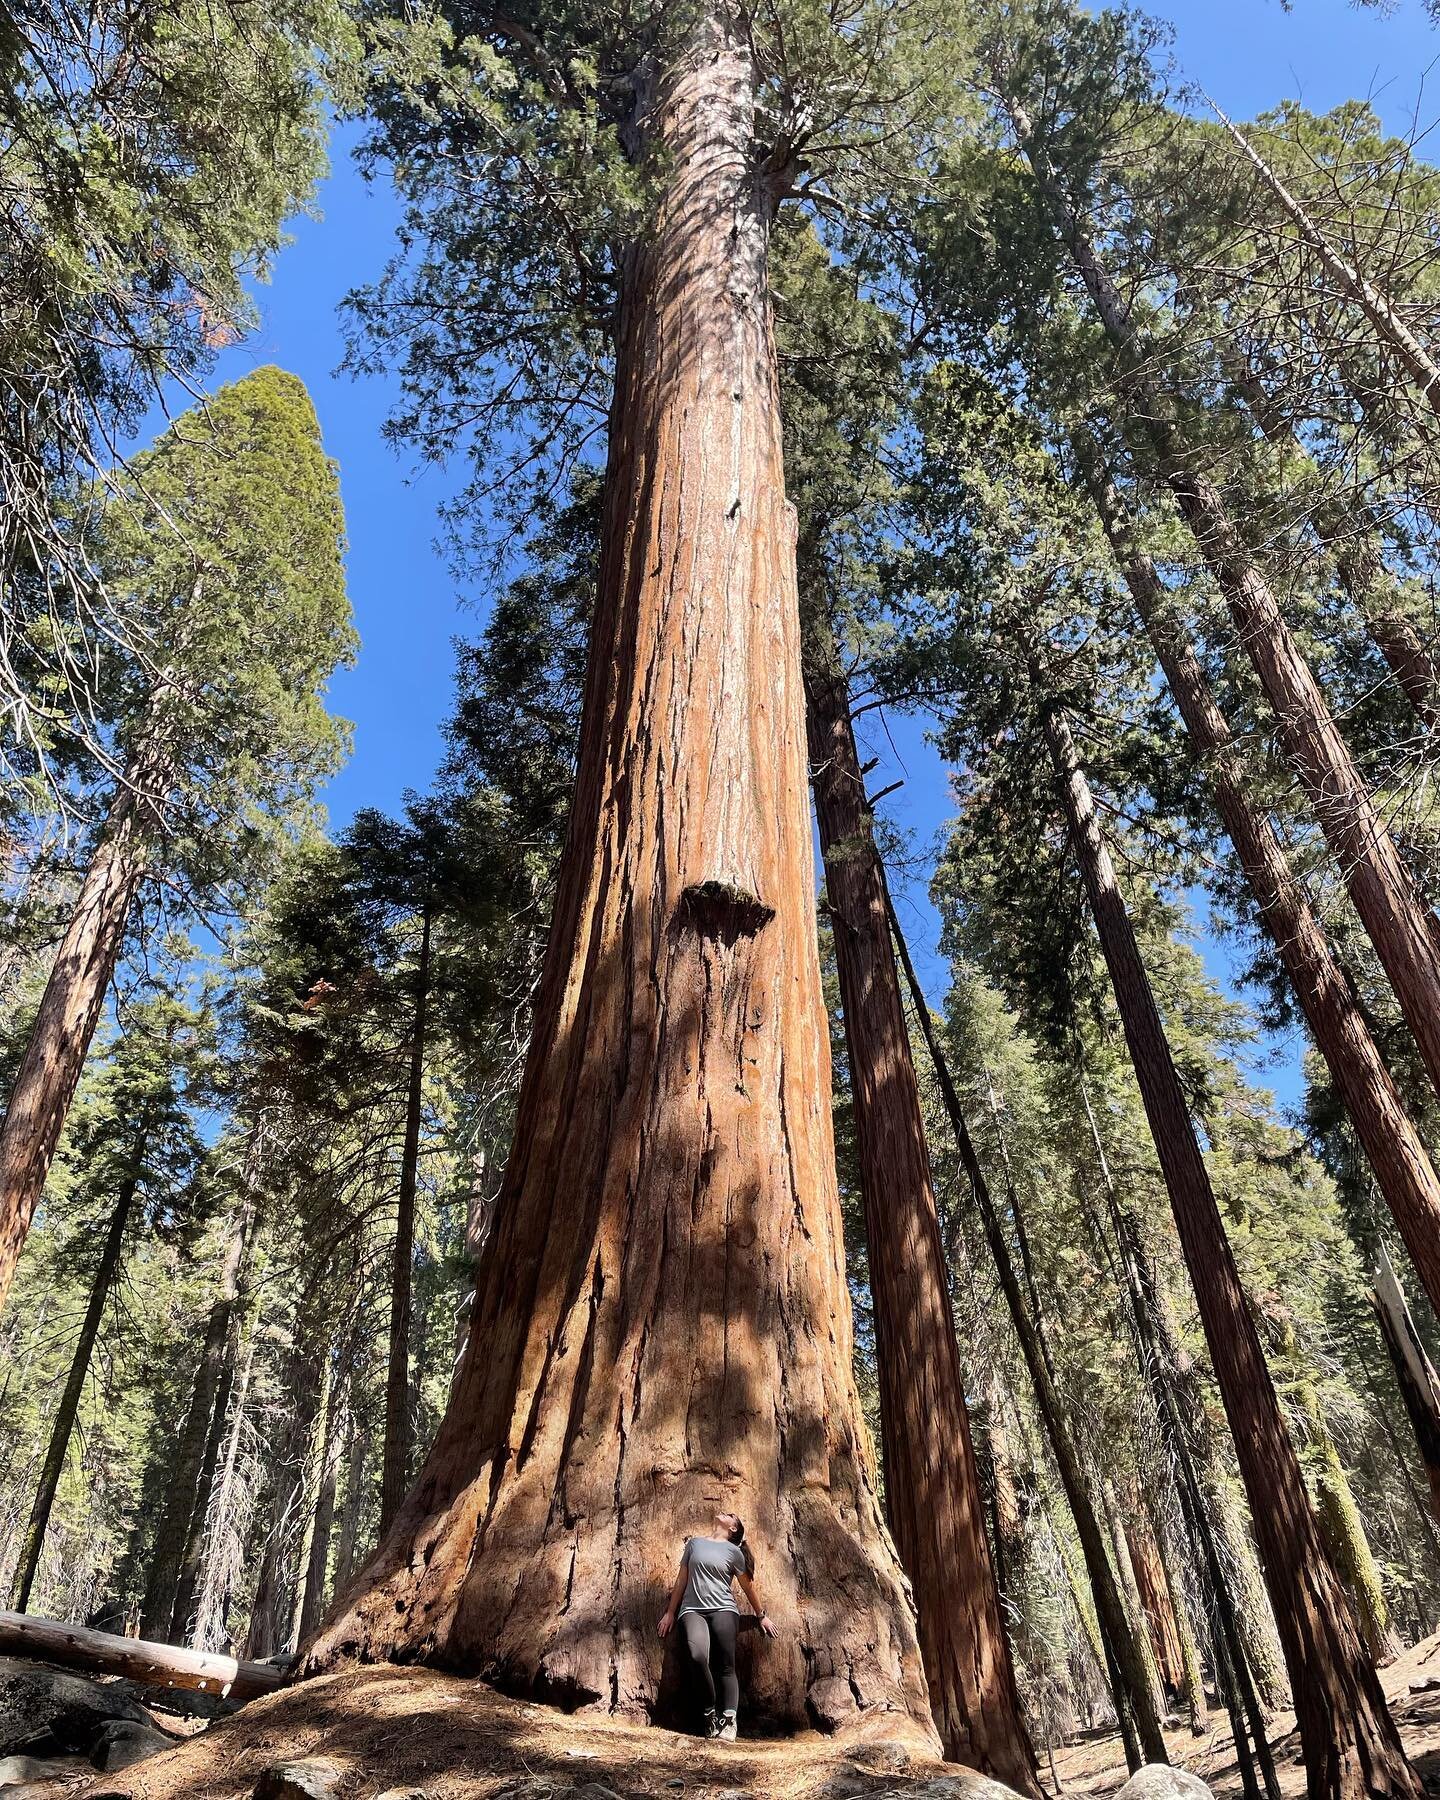 Giant sequoias 💛

Seeing the sequoias has been high on my list, especially since visiting Redwoods in 2019. We were in the area about a month ago and swung into the park for a super quick day trip. One day was enough time to hike up Moro Rock, see S